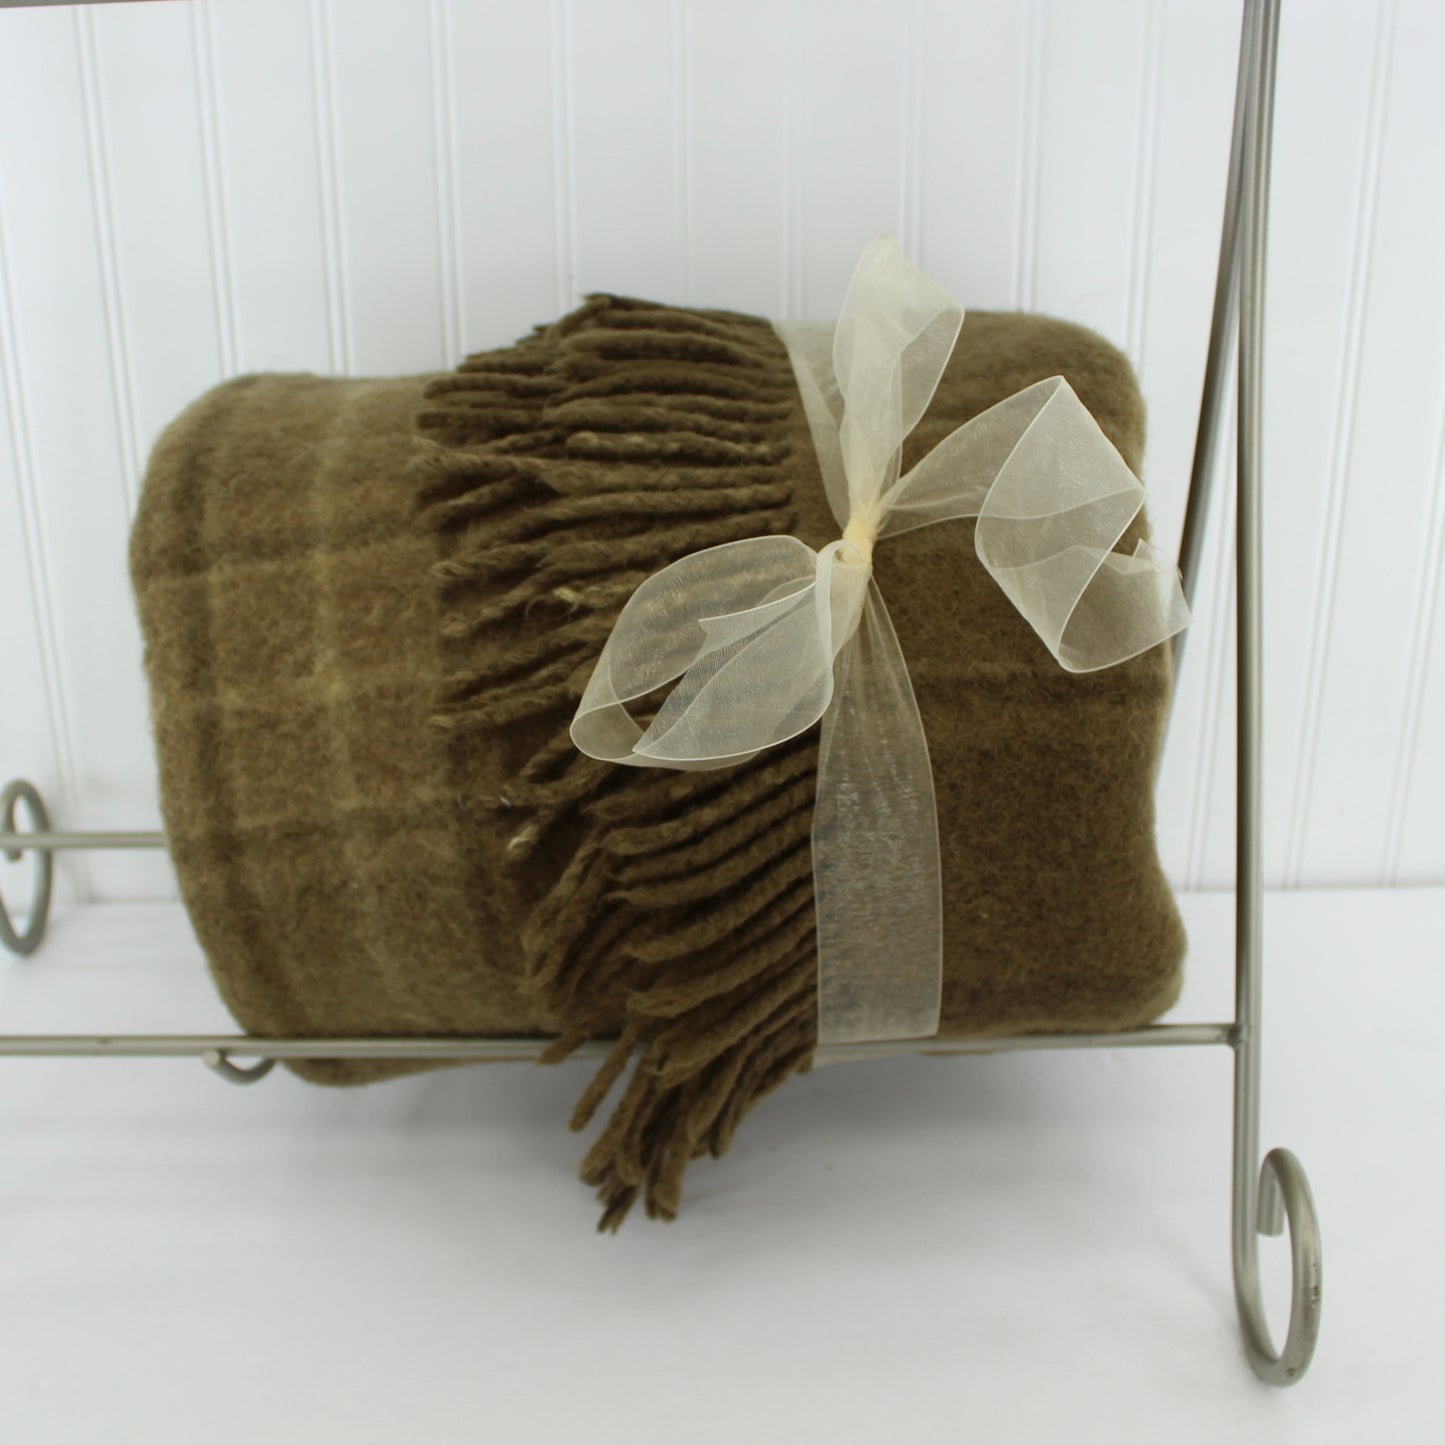 Sibley Lindsay Curr Rochester NY Wool Throw Blanket Very Heavy Reversible Brown Plaid to Solid very warm heavy blanket